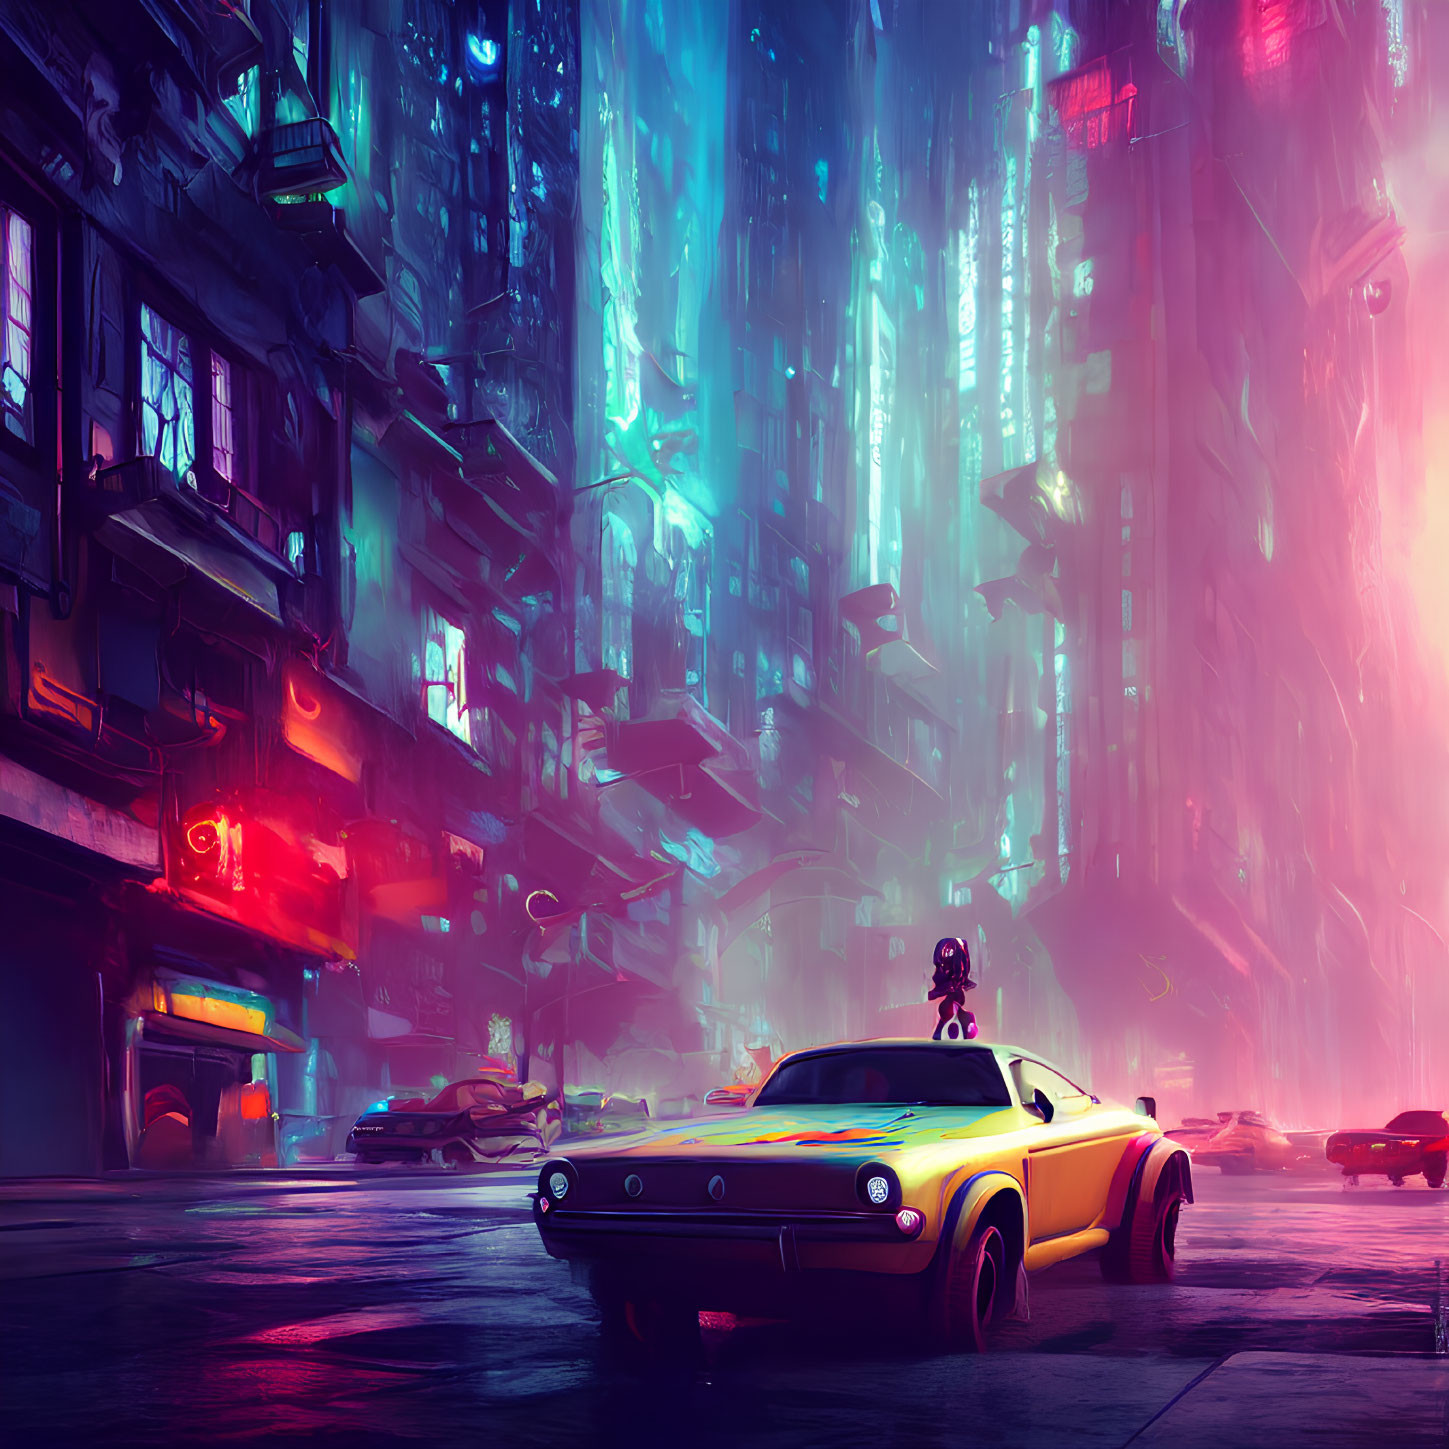 Neon-lit cyberpunk cityscape with classic car and futuristic ambiance